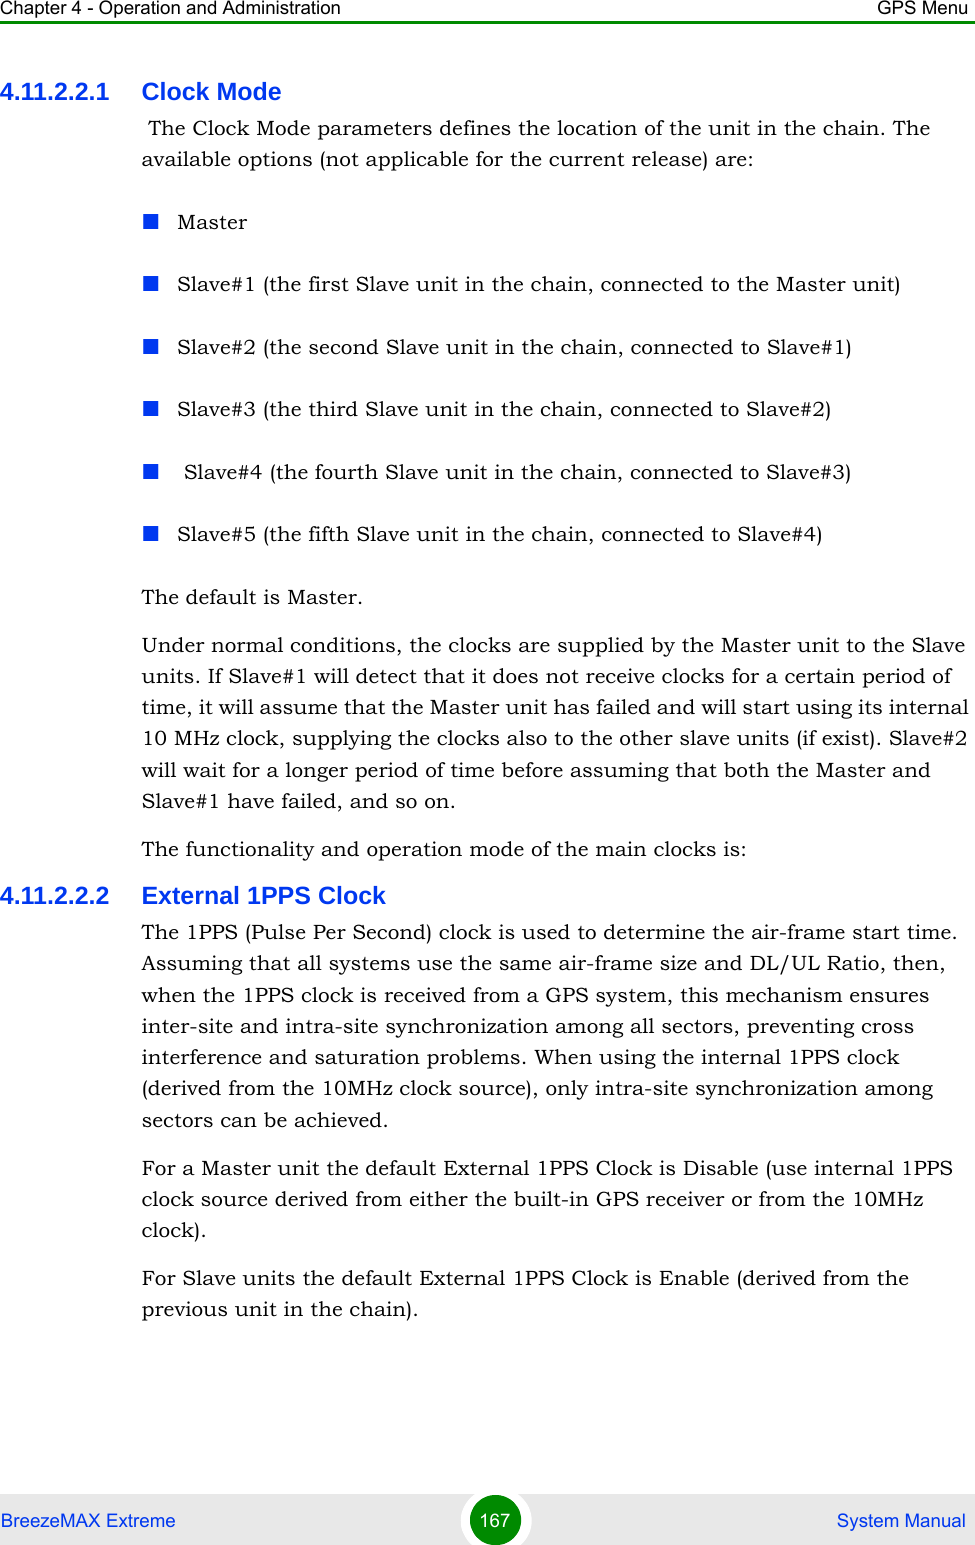 Chapter 4 - Operation and Administration GPS MenuBreezeMAX Extreme 167  System Manual4.11.2.2.1 Clock Mode The Clock Mode parameters defines the location of the unit in the chain. The available options (not applicable for the current release) are:MasterSlave#1 (the first Slave unit in the chain, connected to the Master unit)Slave#2 (the second Slave unit in the chain, connected to Slave#1)Slave#3 (the third Slave unit in the chain, connected to Slave#2) Slave#4 (the fourth Slave unit in the chain, connected to Slave#3)Slave#5 (the fifth Slave unit in the chain, connected to Slave#4)The default is Master.Under normal conditions, the clocks are supplied by the Master unit to the Slave units. If Slave#1 will detect that it does not receive clocks for a certain period of time, it will assume that the Master unit has failed and will start using its internal 10 MHz clock, supplying the clocks also to the other slave units (if exist). Slave#2 will wait for a longer period of time before assuming that both the Master and Slave#1 have failed, and so on.The functionality and operation mode of the main clocks is:4.11.2.2.2 External 1PPS ClockThe 1PPS (Pulse Per Second) clock is used to determine the air-frame start time. Assuming that all systems use the same air-frame size and DL/UL Ratio, then, when the 1PPS clock is received from a GPS system, this mechanism ensures inter-site and intra-site synchronization among all sectors, preventing cross interference and saturation problems. When using the internal 1PPS clock (derived from the 10MHz clock source), only intra-site synchronization among sectors can be achieved.For a Master unit the default External 1PPS Clock is Disable (use internal 1PPS clock source derived from either the built-in GPS receiver or from the 10MHz clock).For Slave units the default External 1PPS Clock is Enable (derived from the previous unit in the chain).